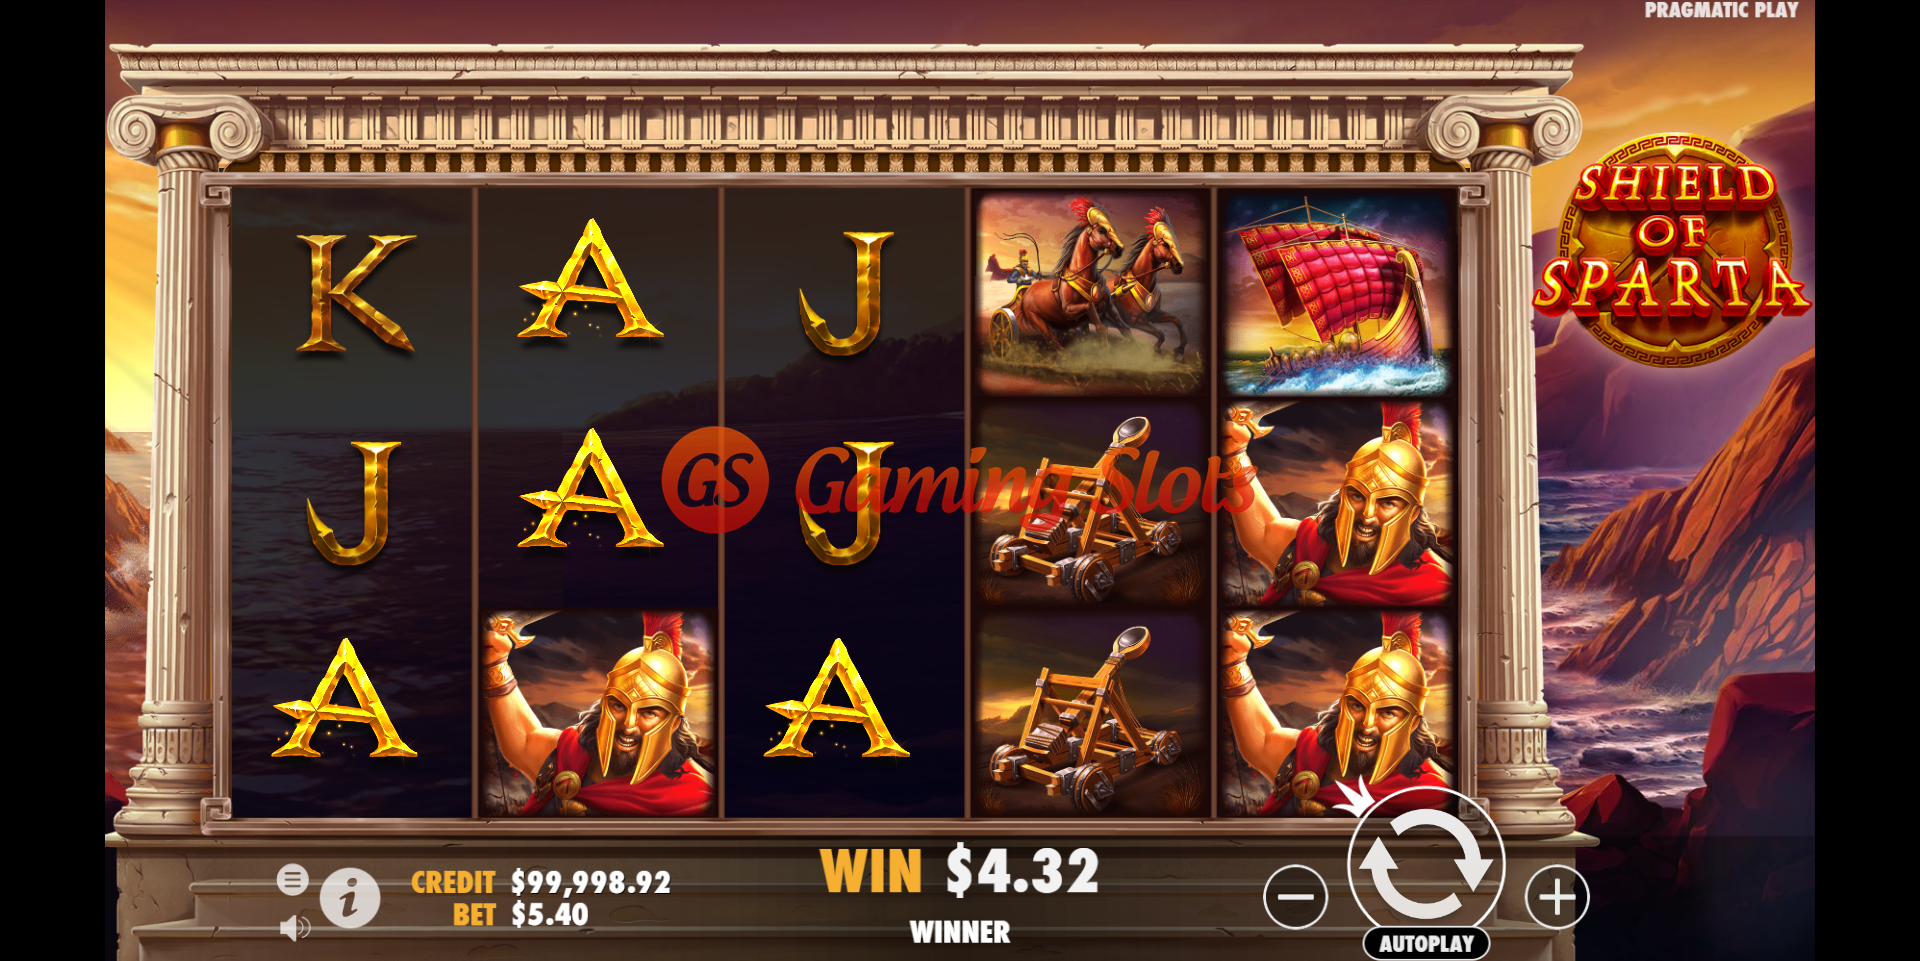 Base Game for Shield of Sparta slot from Pragmatic Play